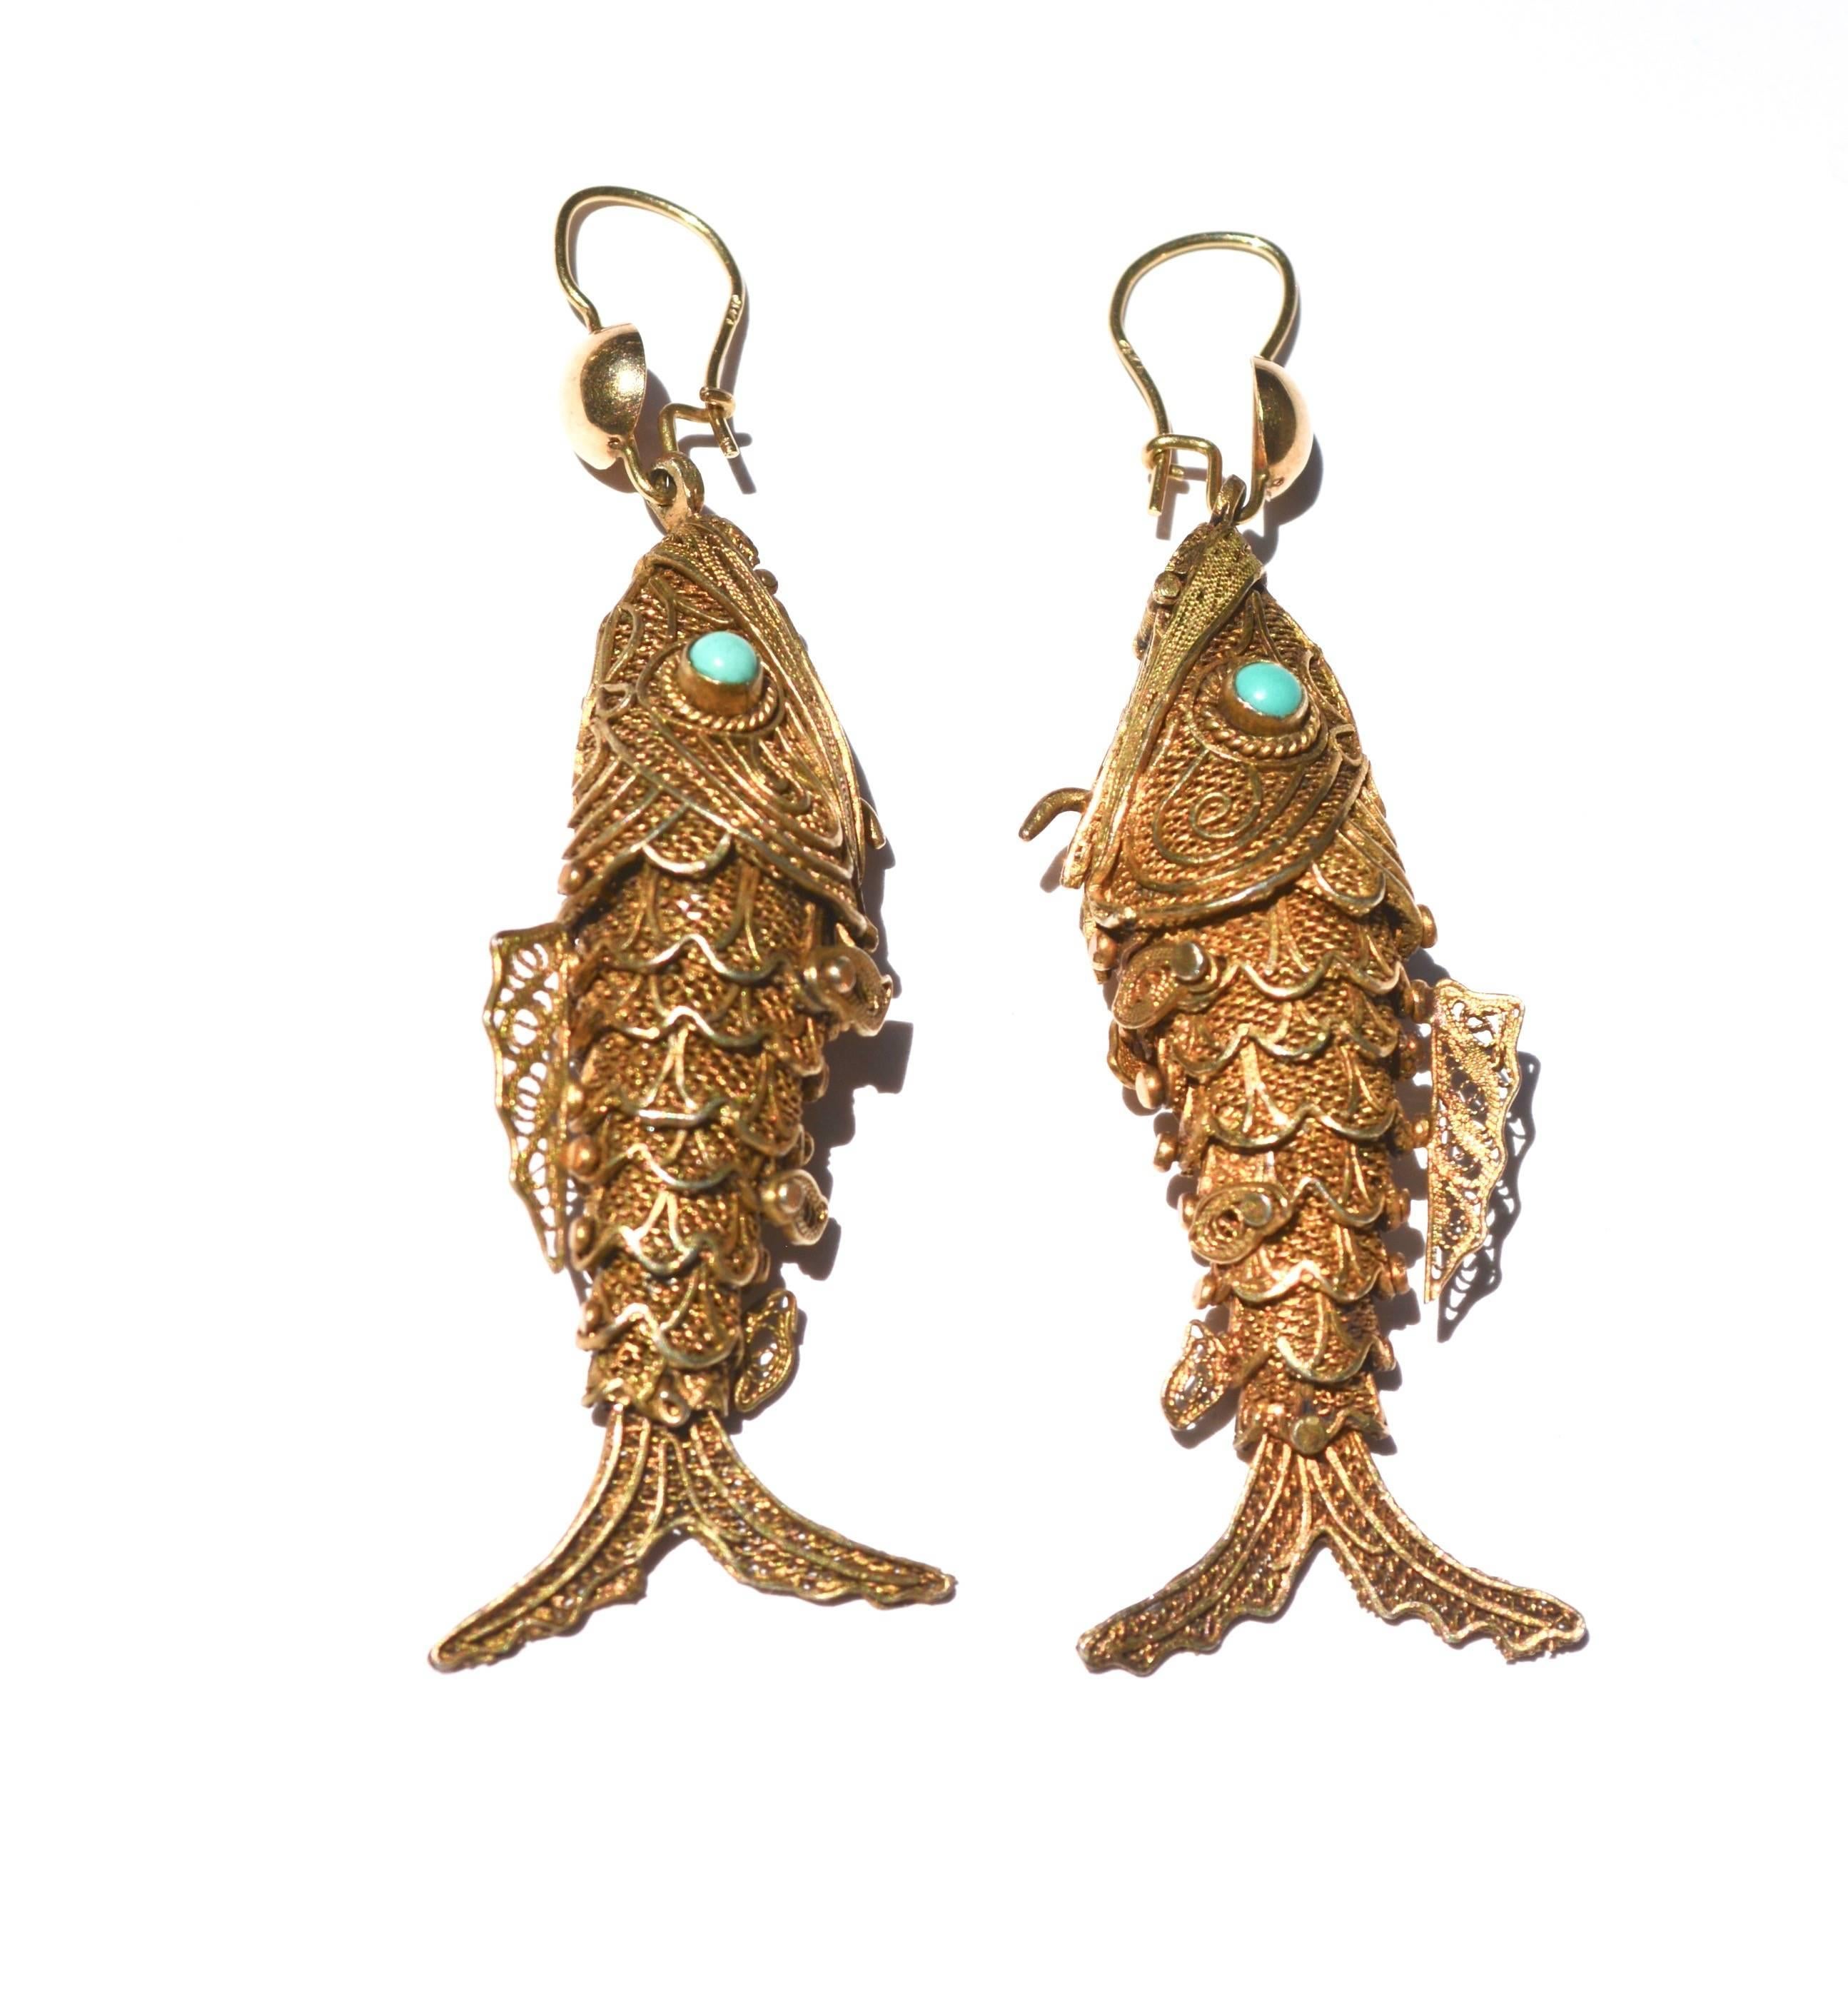 Vintage Chinese fish earrings with marked 14k ear hooks. Opening mouths function, excellent except one fish is missing a tiny side fin.  Total length with hooks is about 2.5